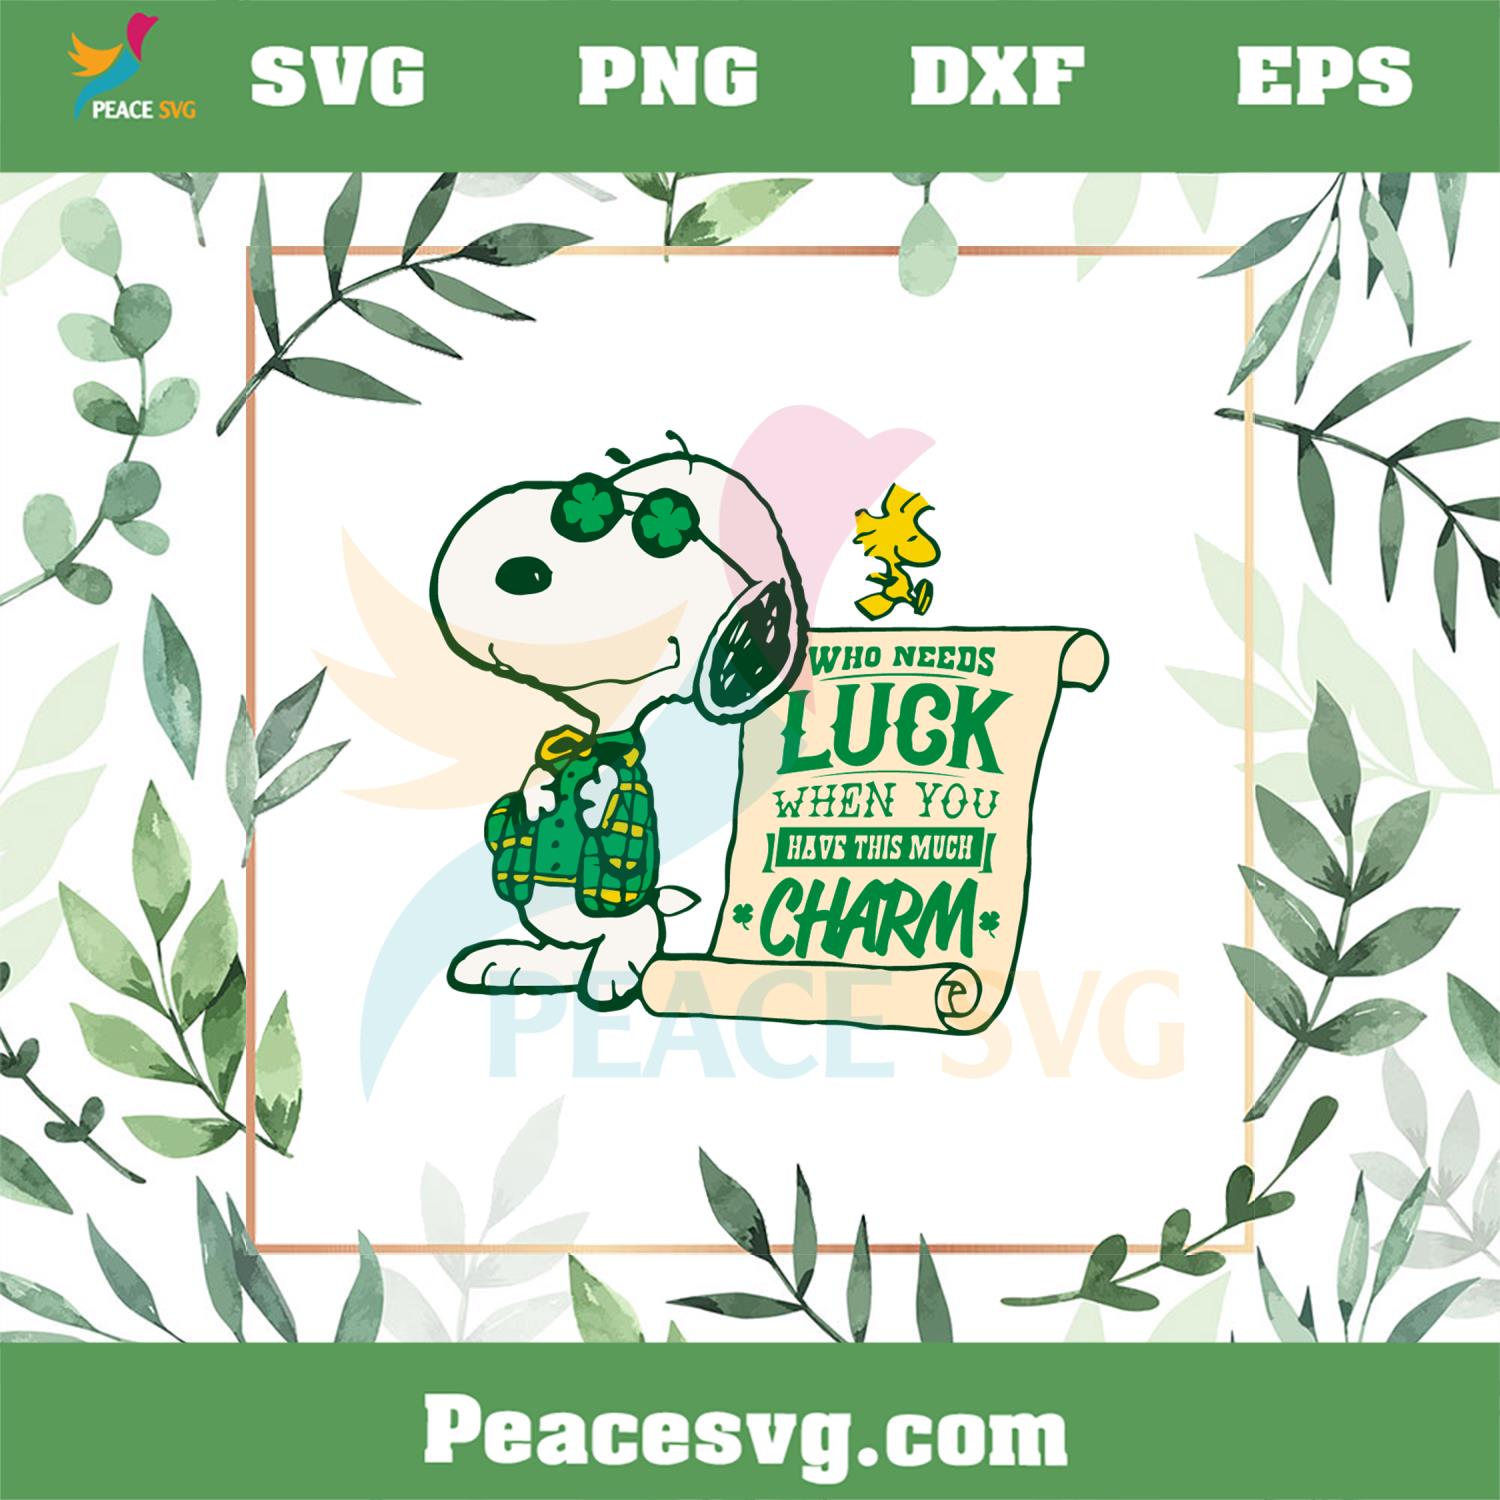 Who Needs Lucky Charm Snoopy Dog Saint Patrick’s Day SVG Cutting Files